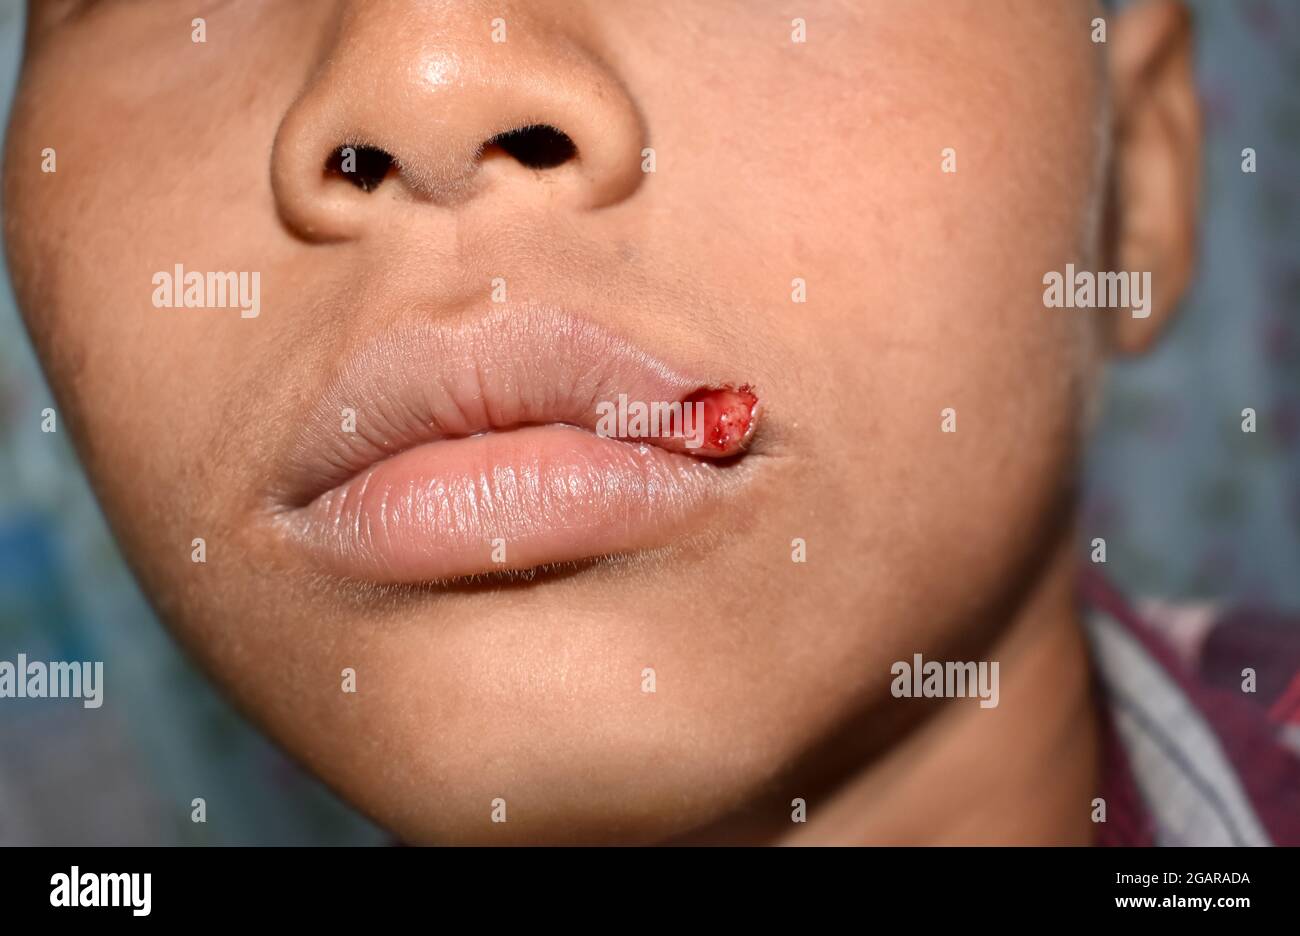 Small lacerated wound in lip of Asian, child. Closeup view. Stock Photo